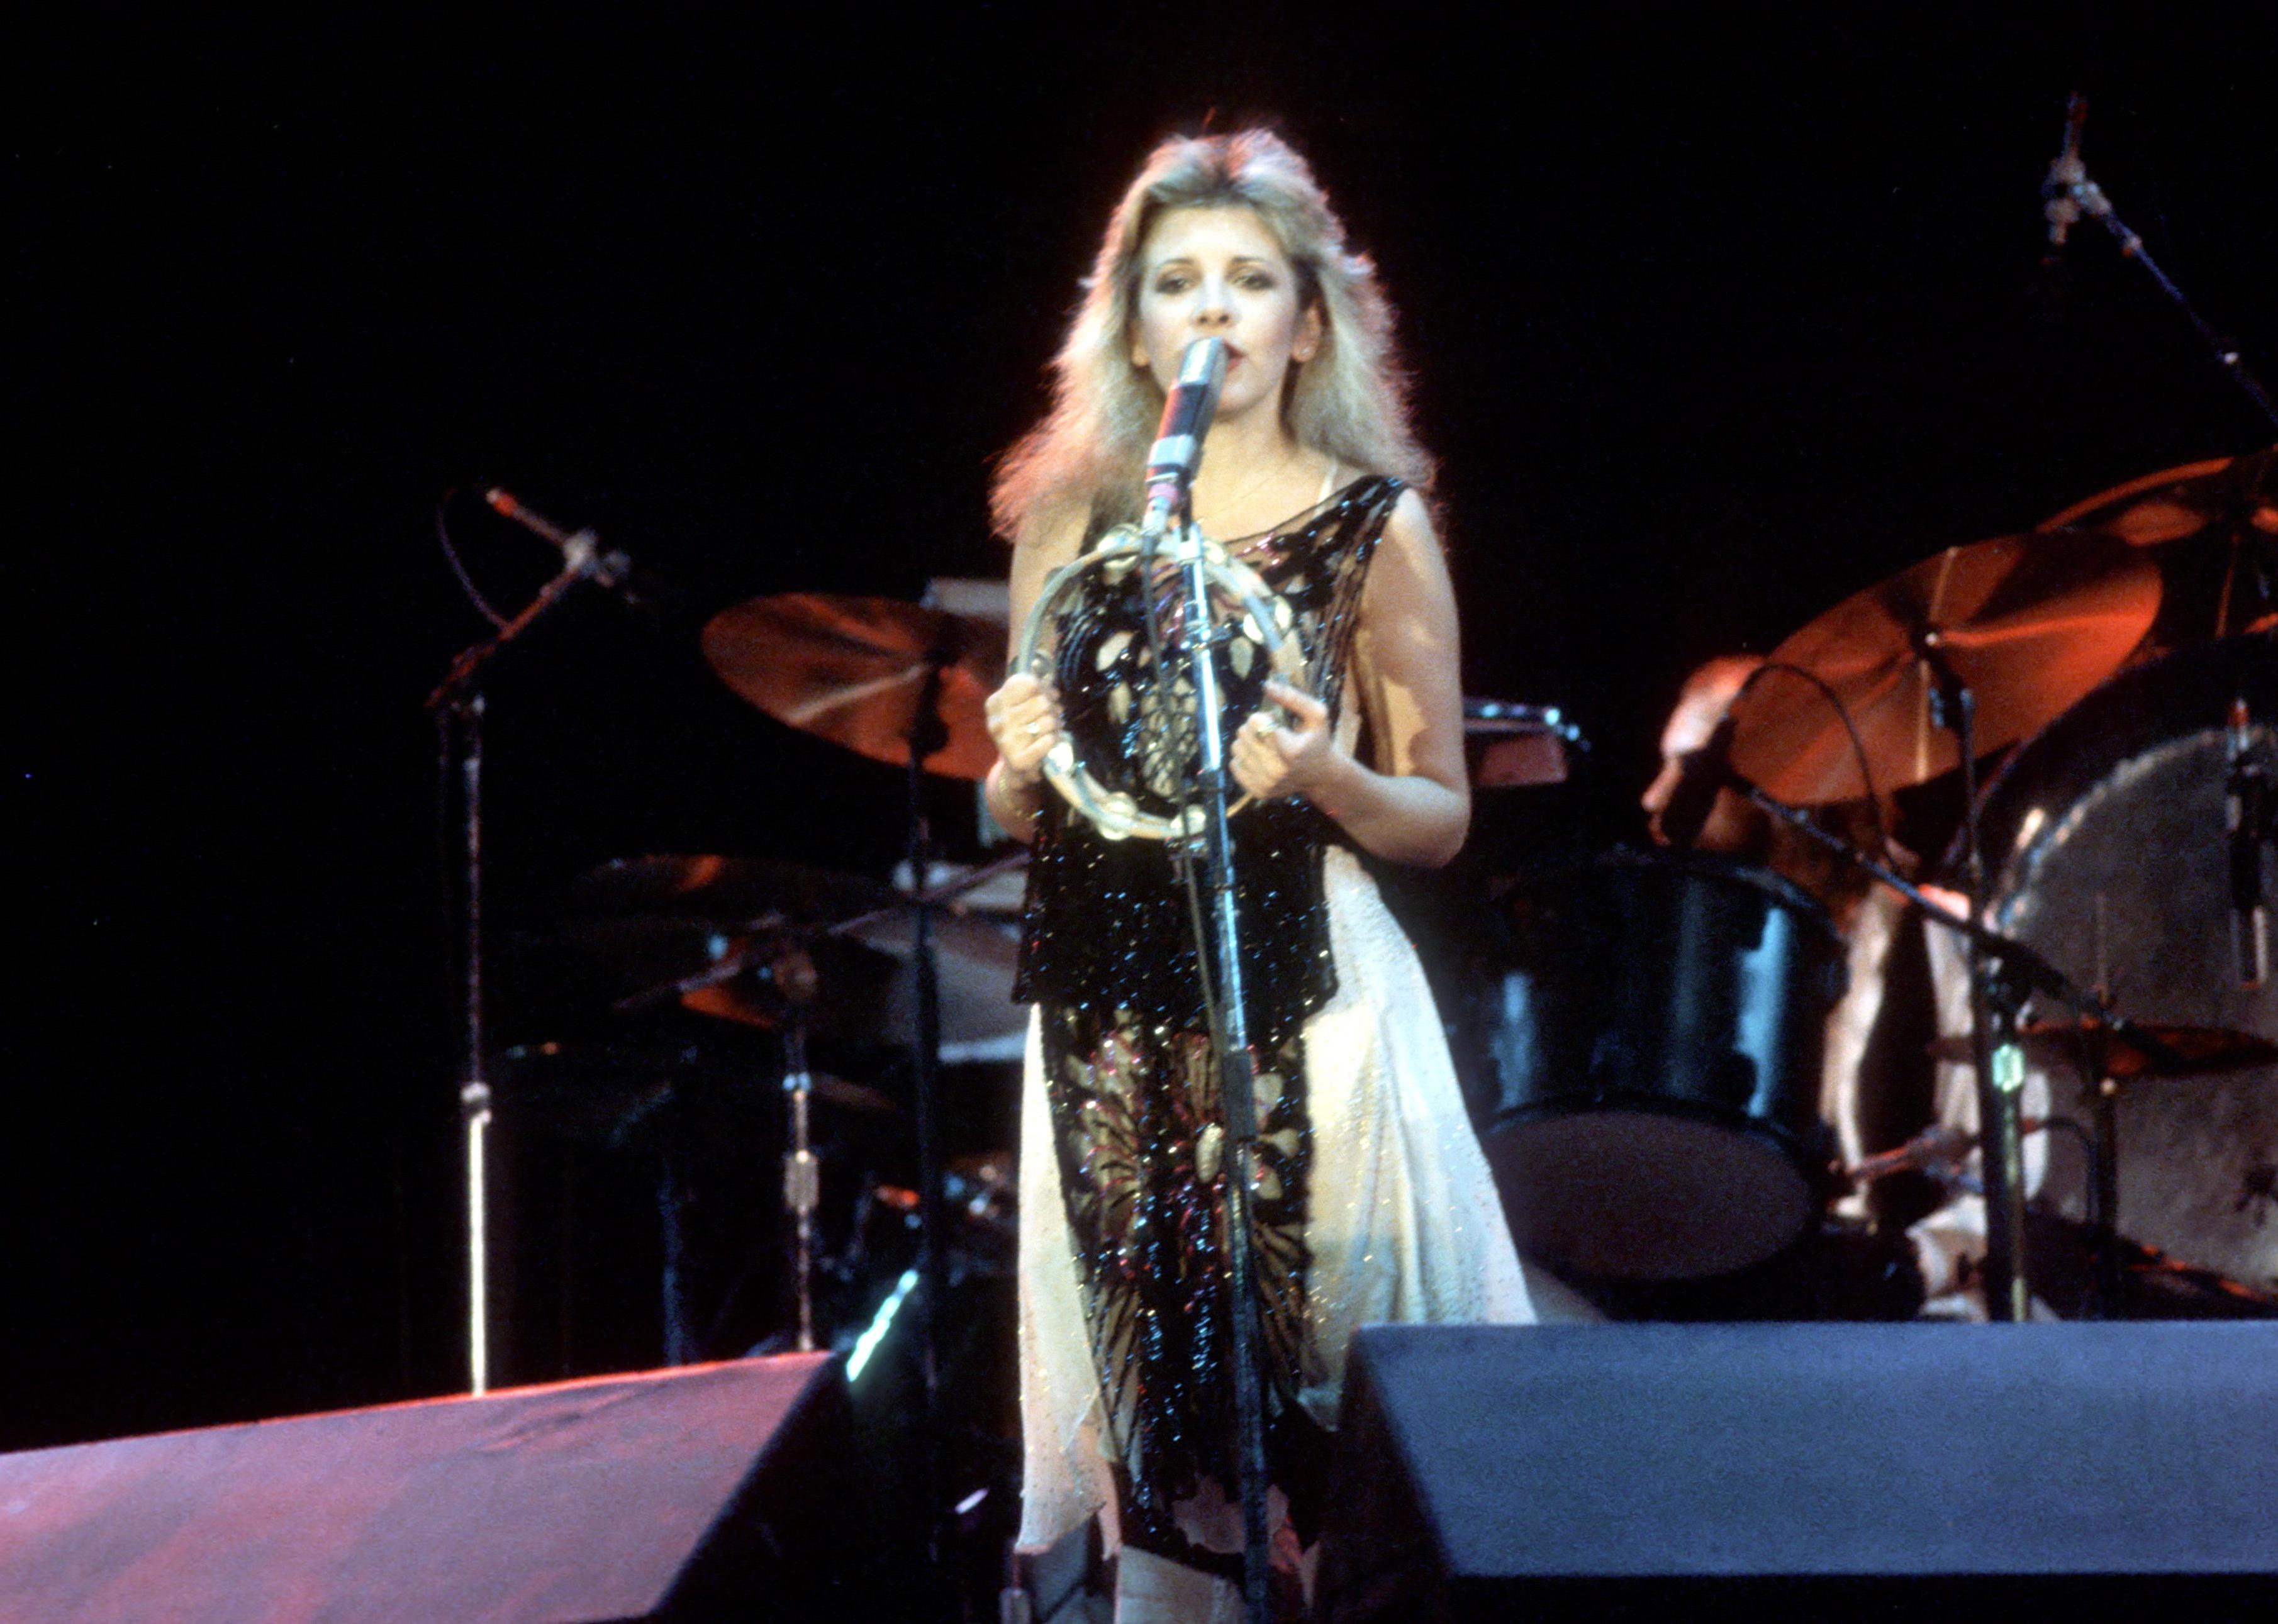 Musicians Tom Petty and Stevie Nicks perform onstage in 1981.